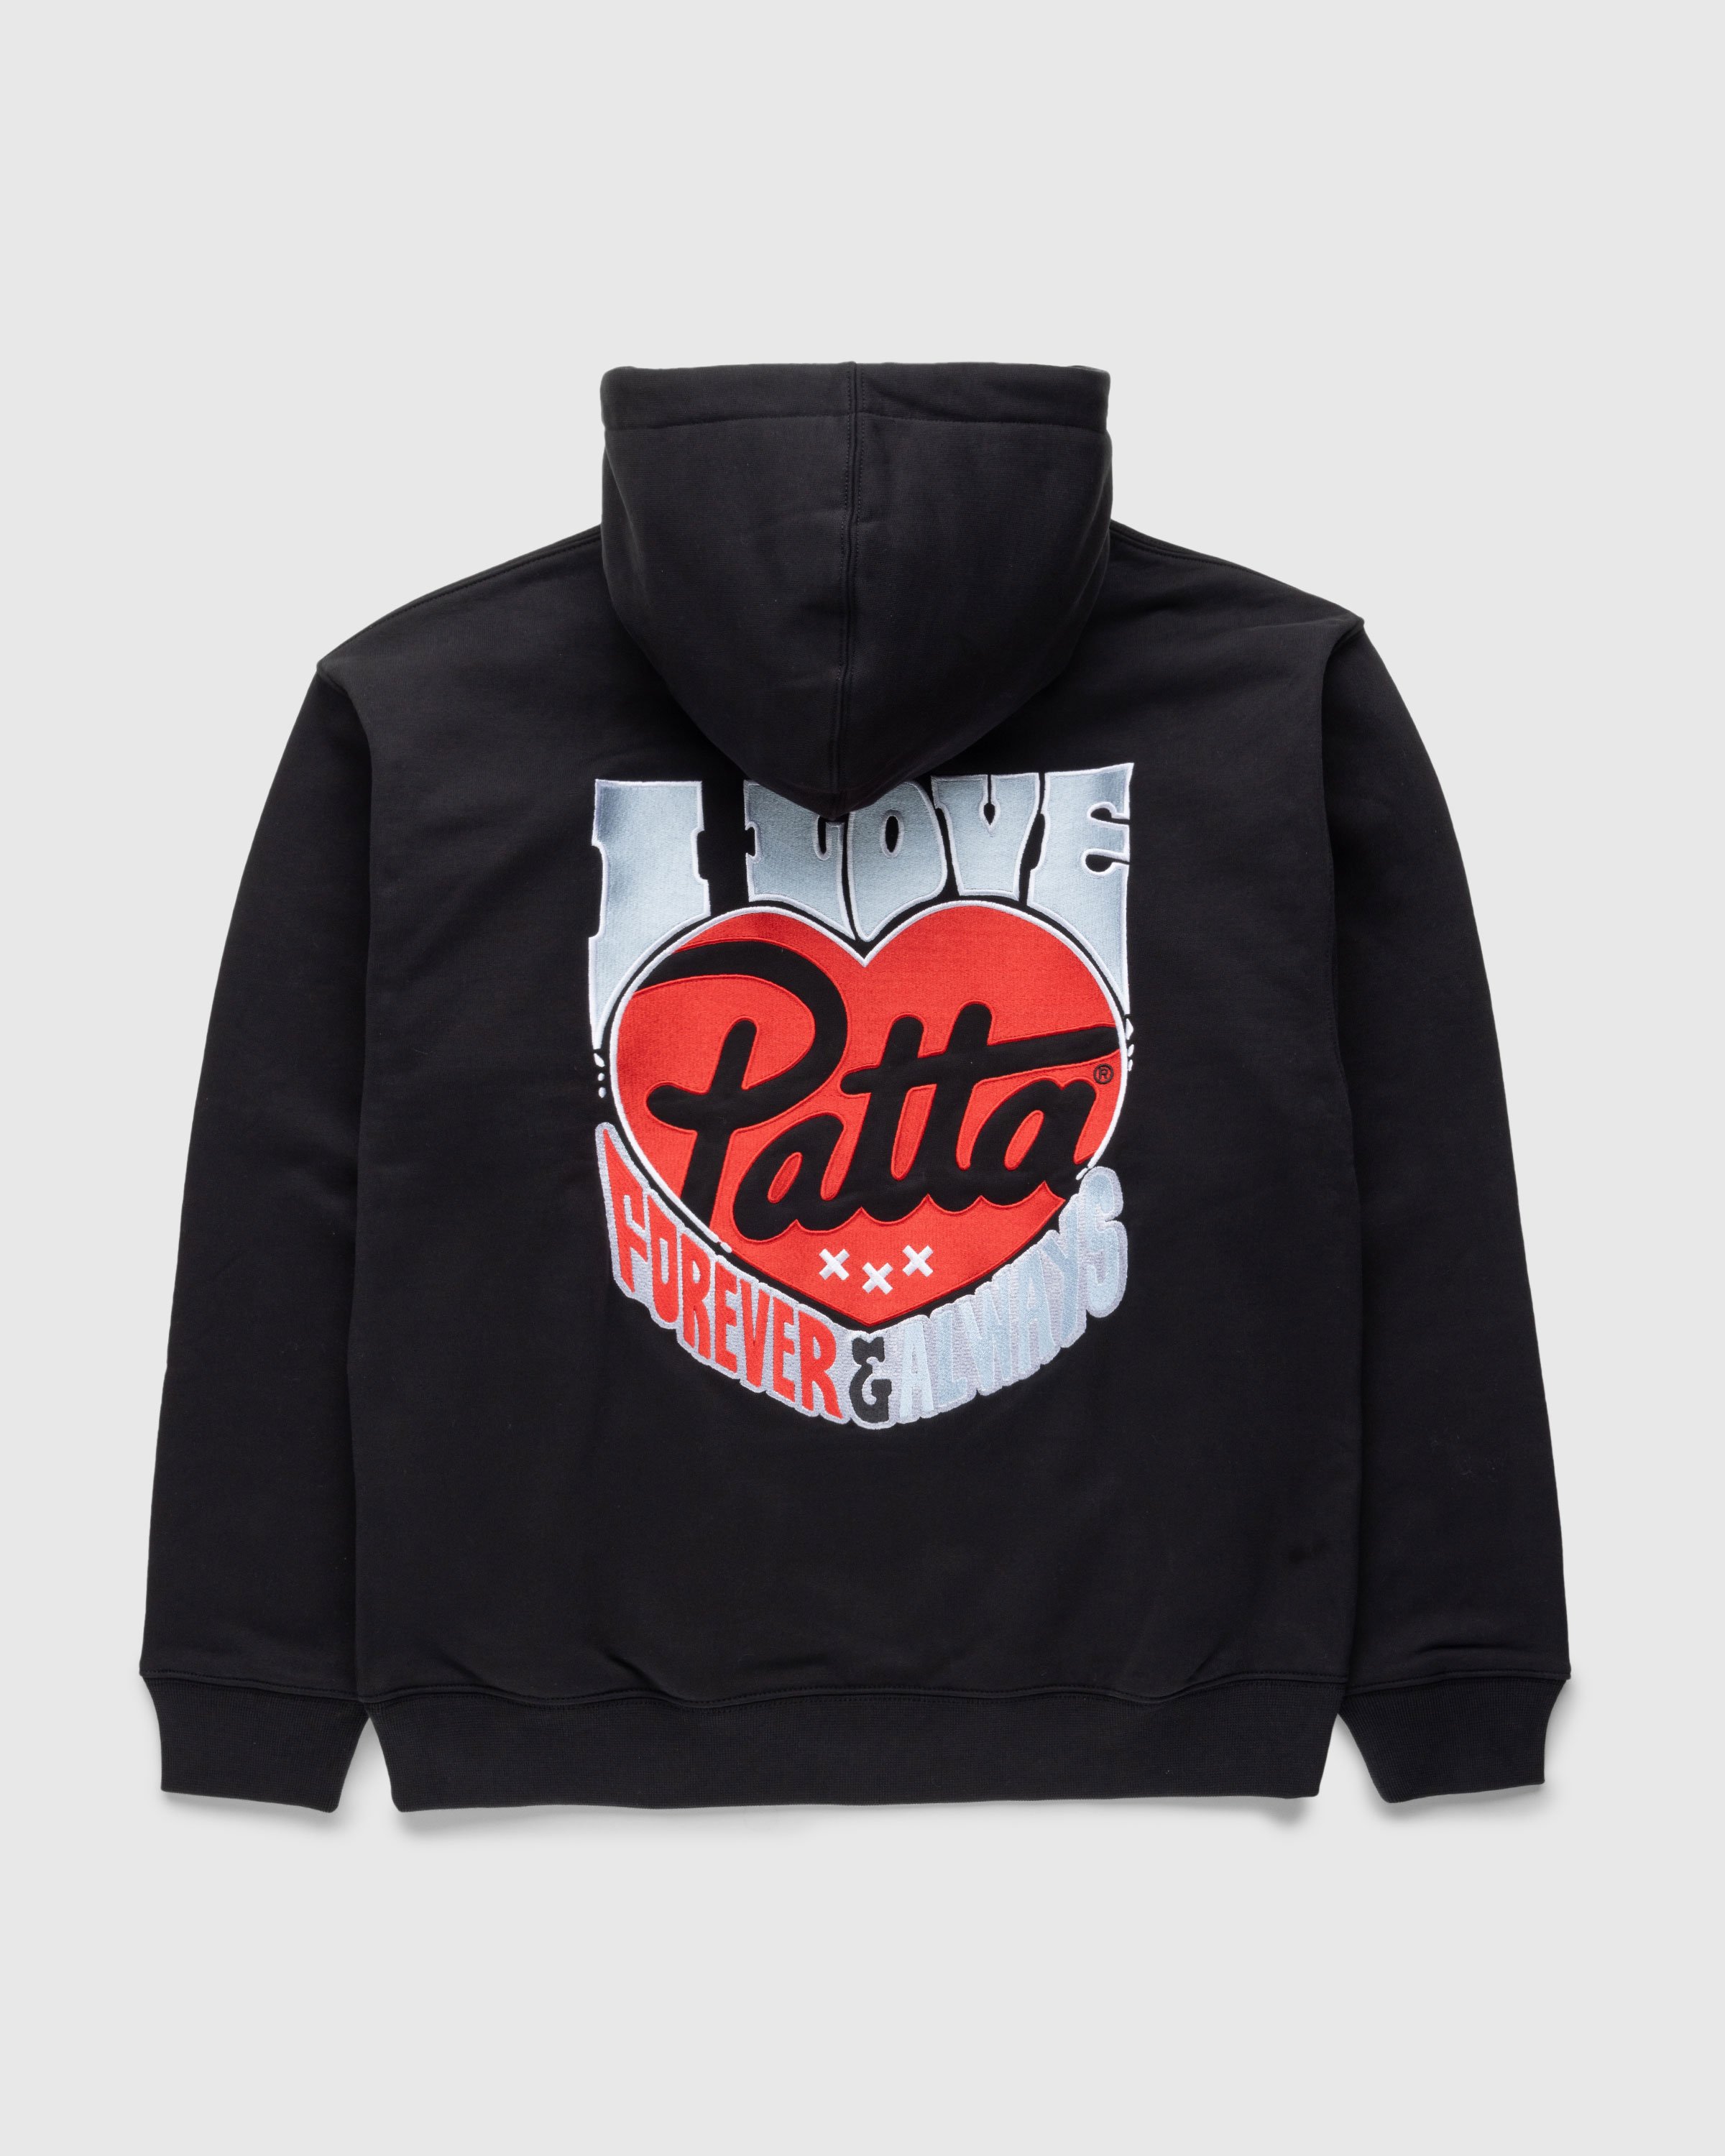 Patta - Forever and Always Boxy Hoodie Black - Clothing - Black - Image 1